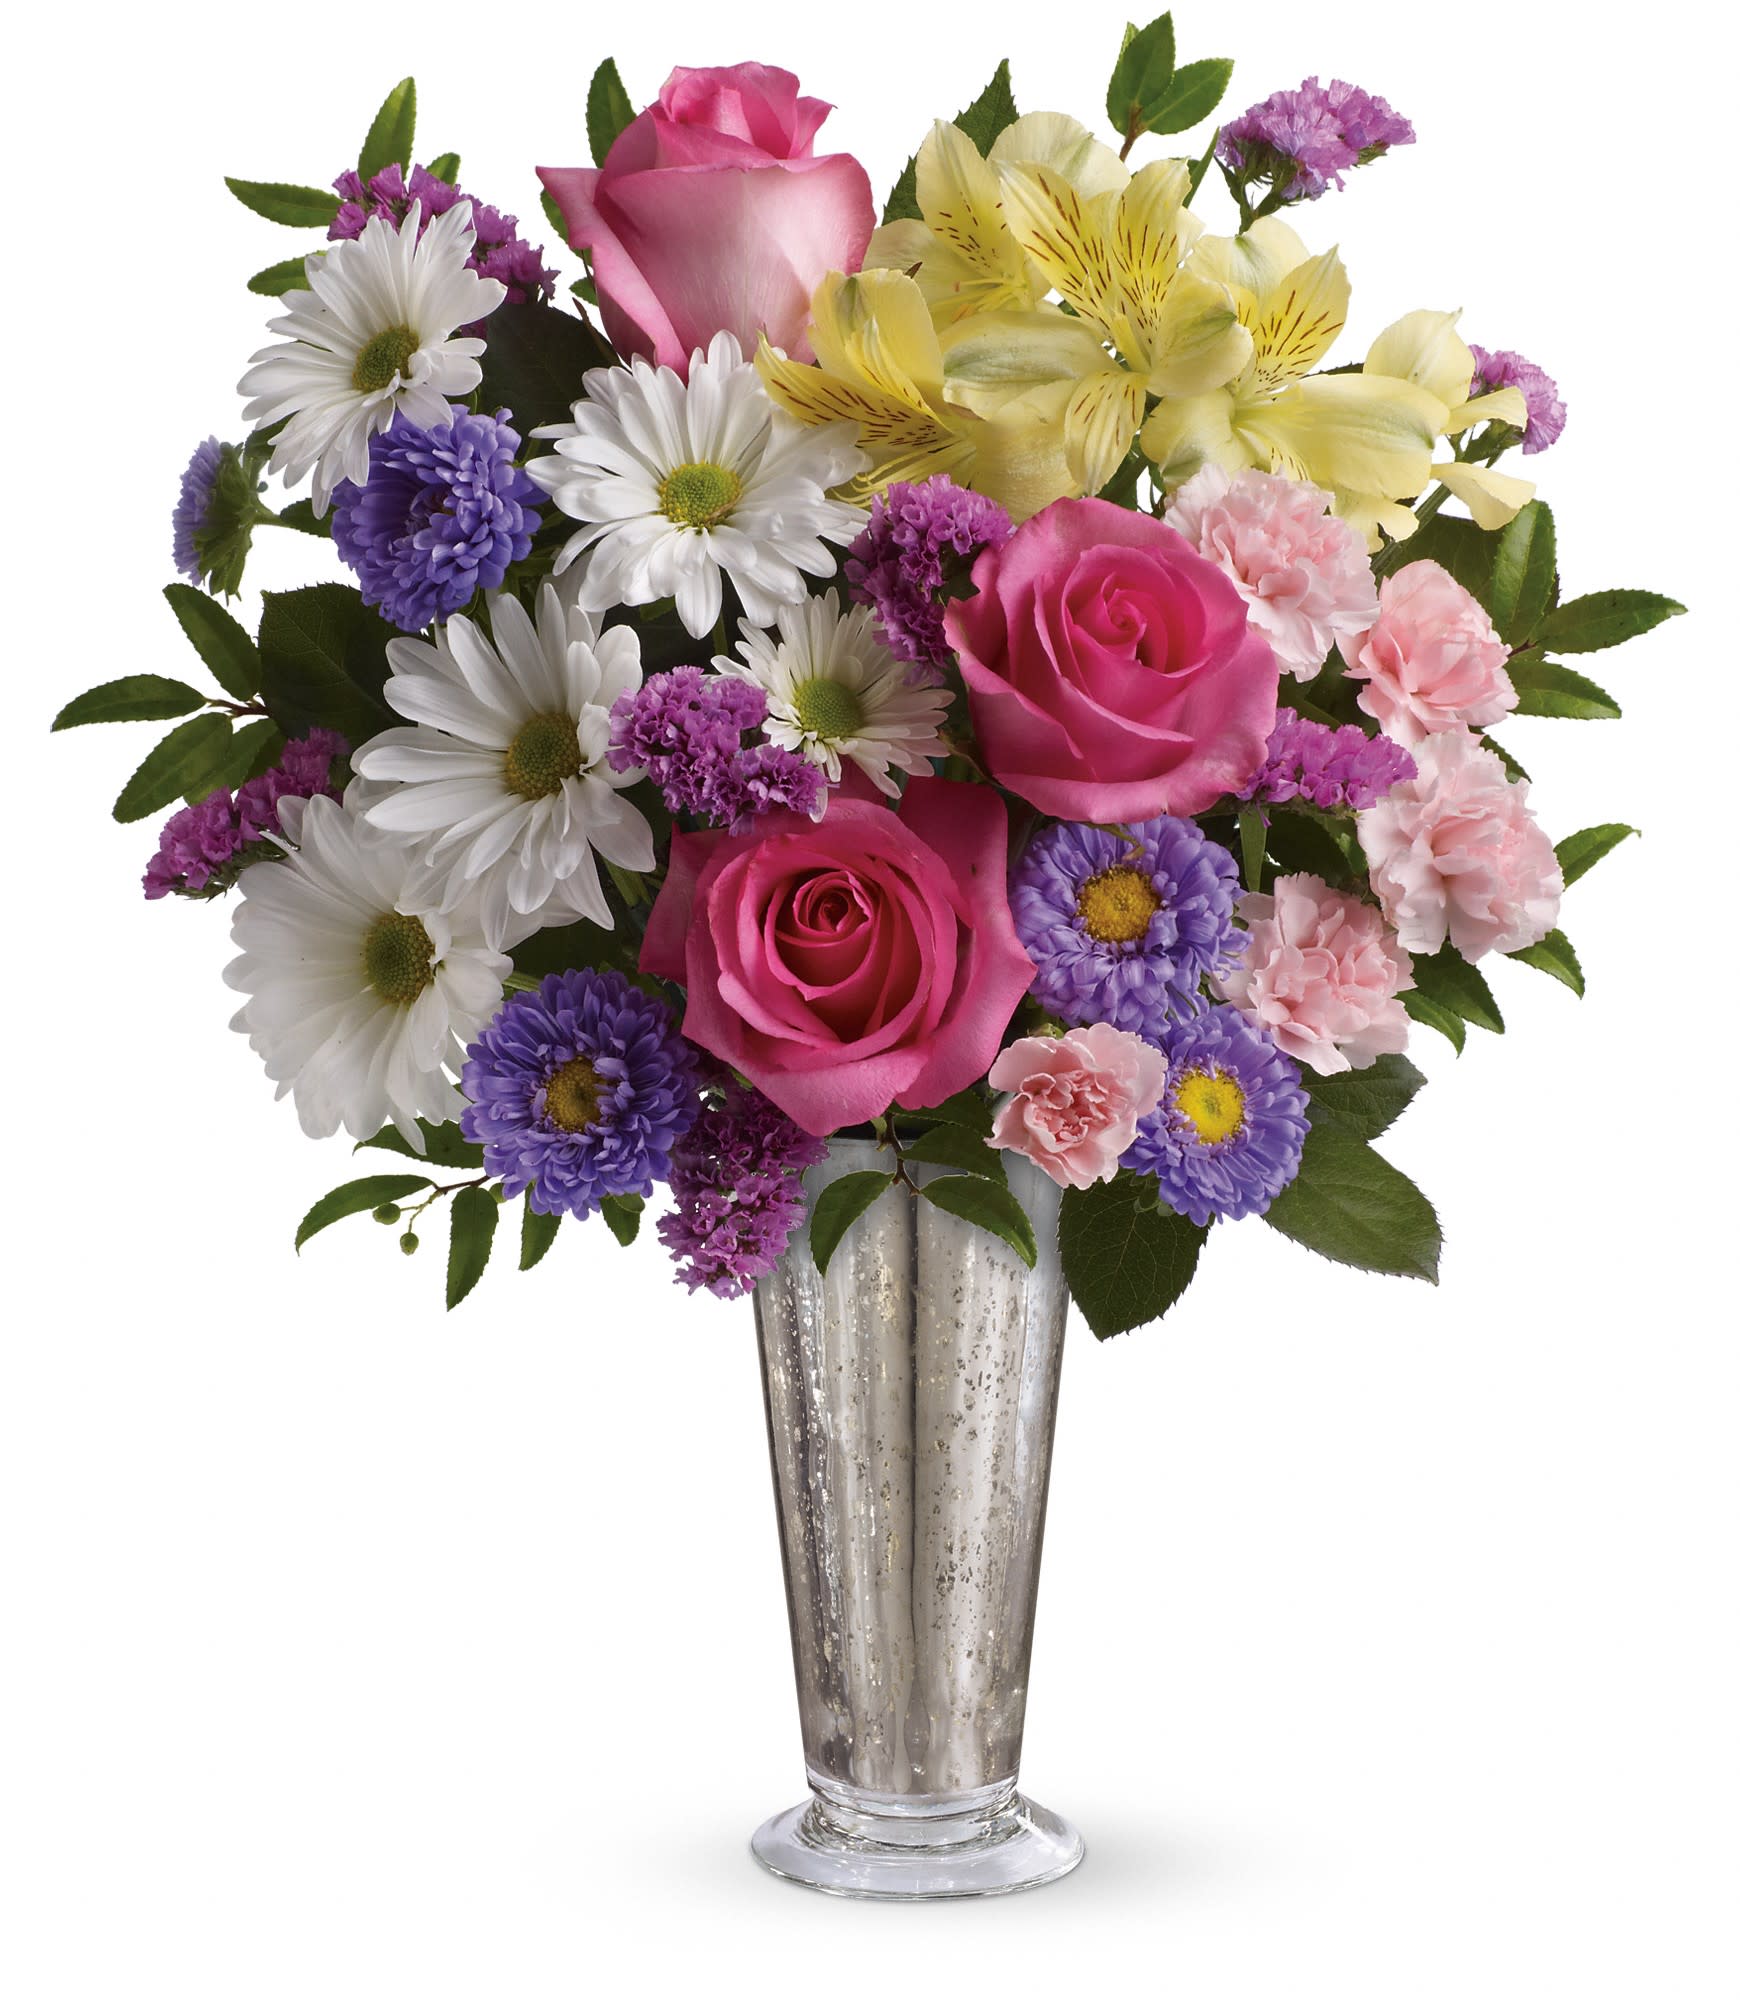 Smile and Shine  - Send a shining smile to someone special with this bright bouquet! The happy mix of roses, alstroemeria and asters are presented in a popular mercury glass vase - a glittering gift for now and forever.